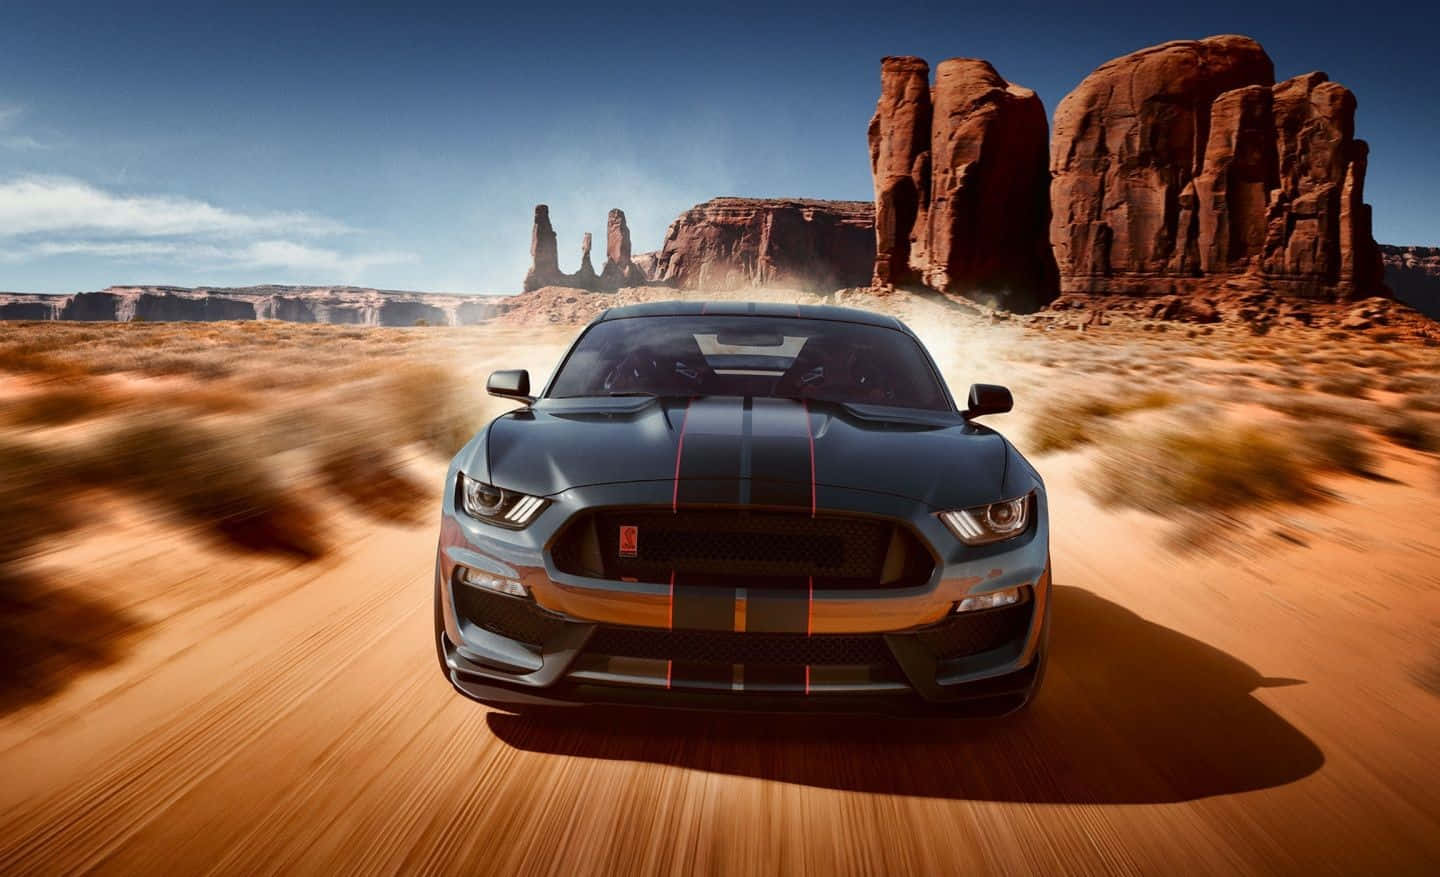 Ford Mustang Shelby GT350 Unbridled Performance Wallpaper